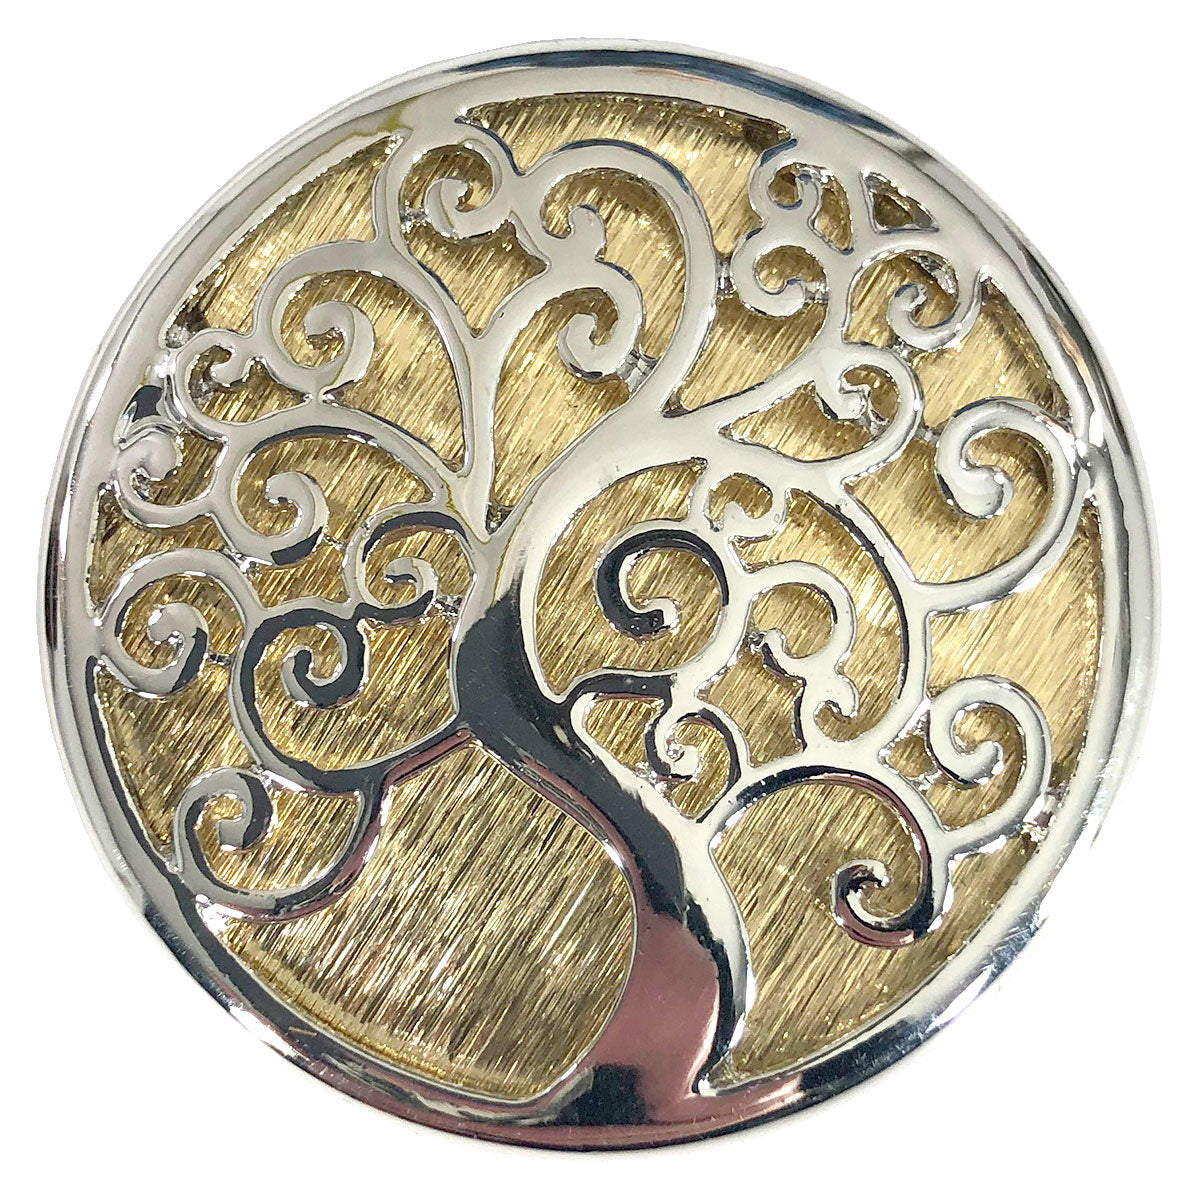 Two Tone Gold and silver tree of life. Magnetic Brooch for Scarves Artistic Sculptural shapes add a personality to absolutely anything you wish to put your stamp on! The Super Strong Magnet is enough for a jacket lapel! Use to hold a sarong or cardigan together.  Great to adorn a hat or to hold a scarf in place with Fabric Safe Magnet.